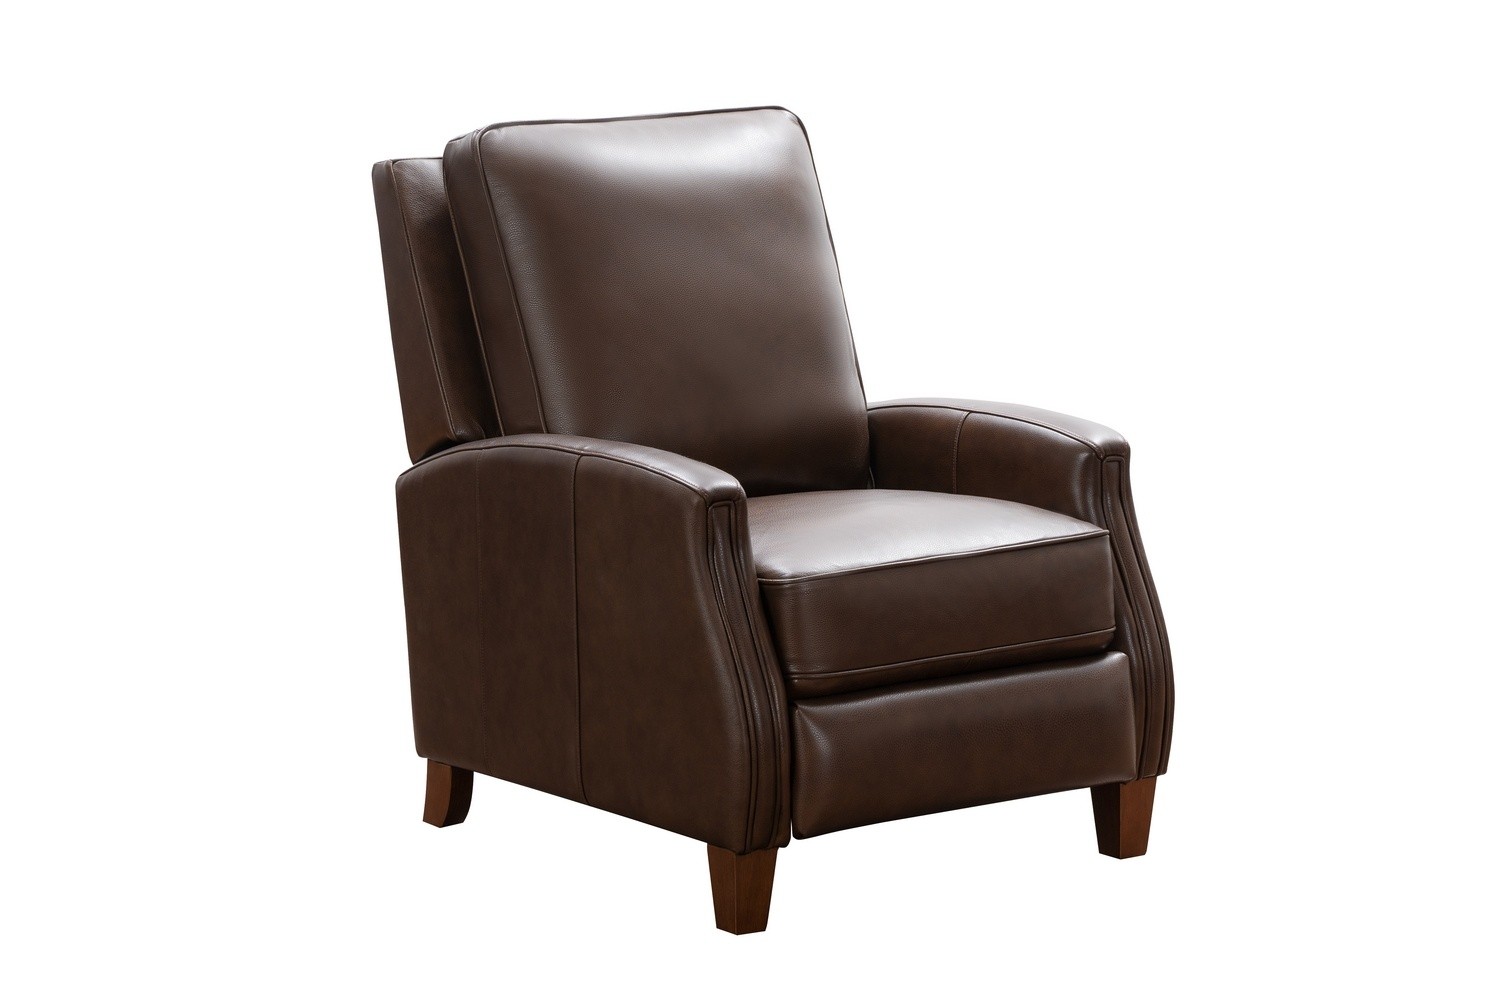 Barcalounger Penrose Recliner Chair - Wenlock Double Chocolate/All Leather